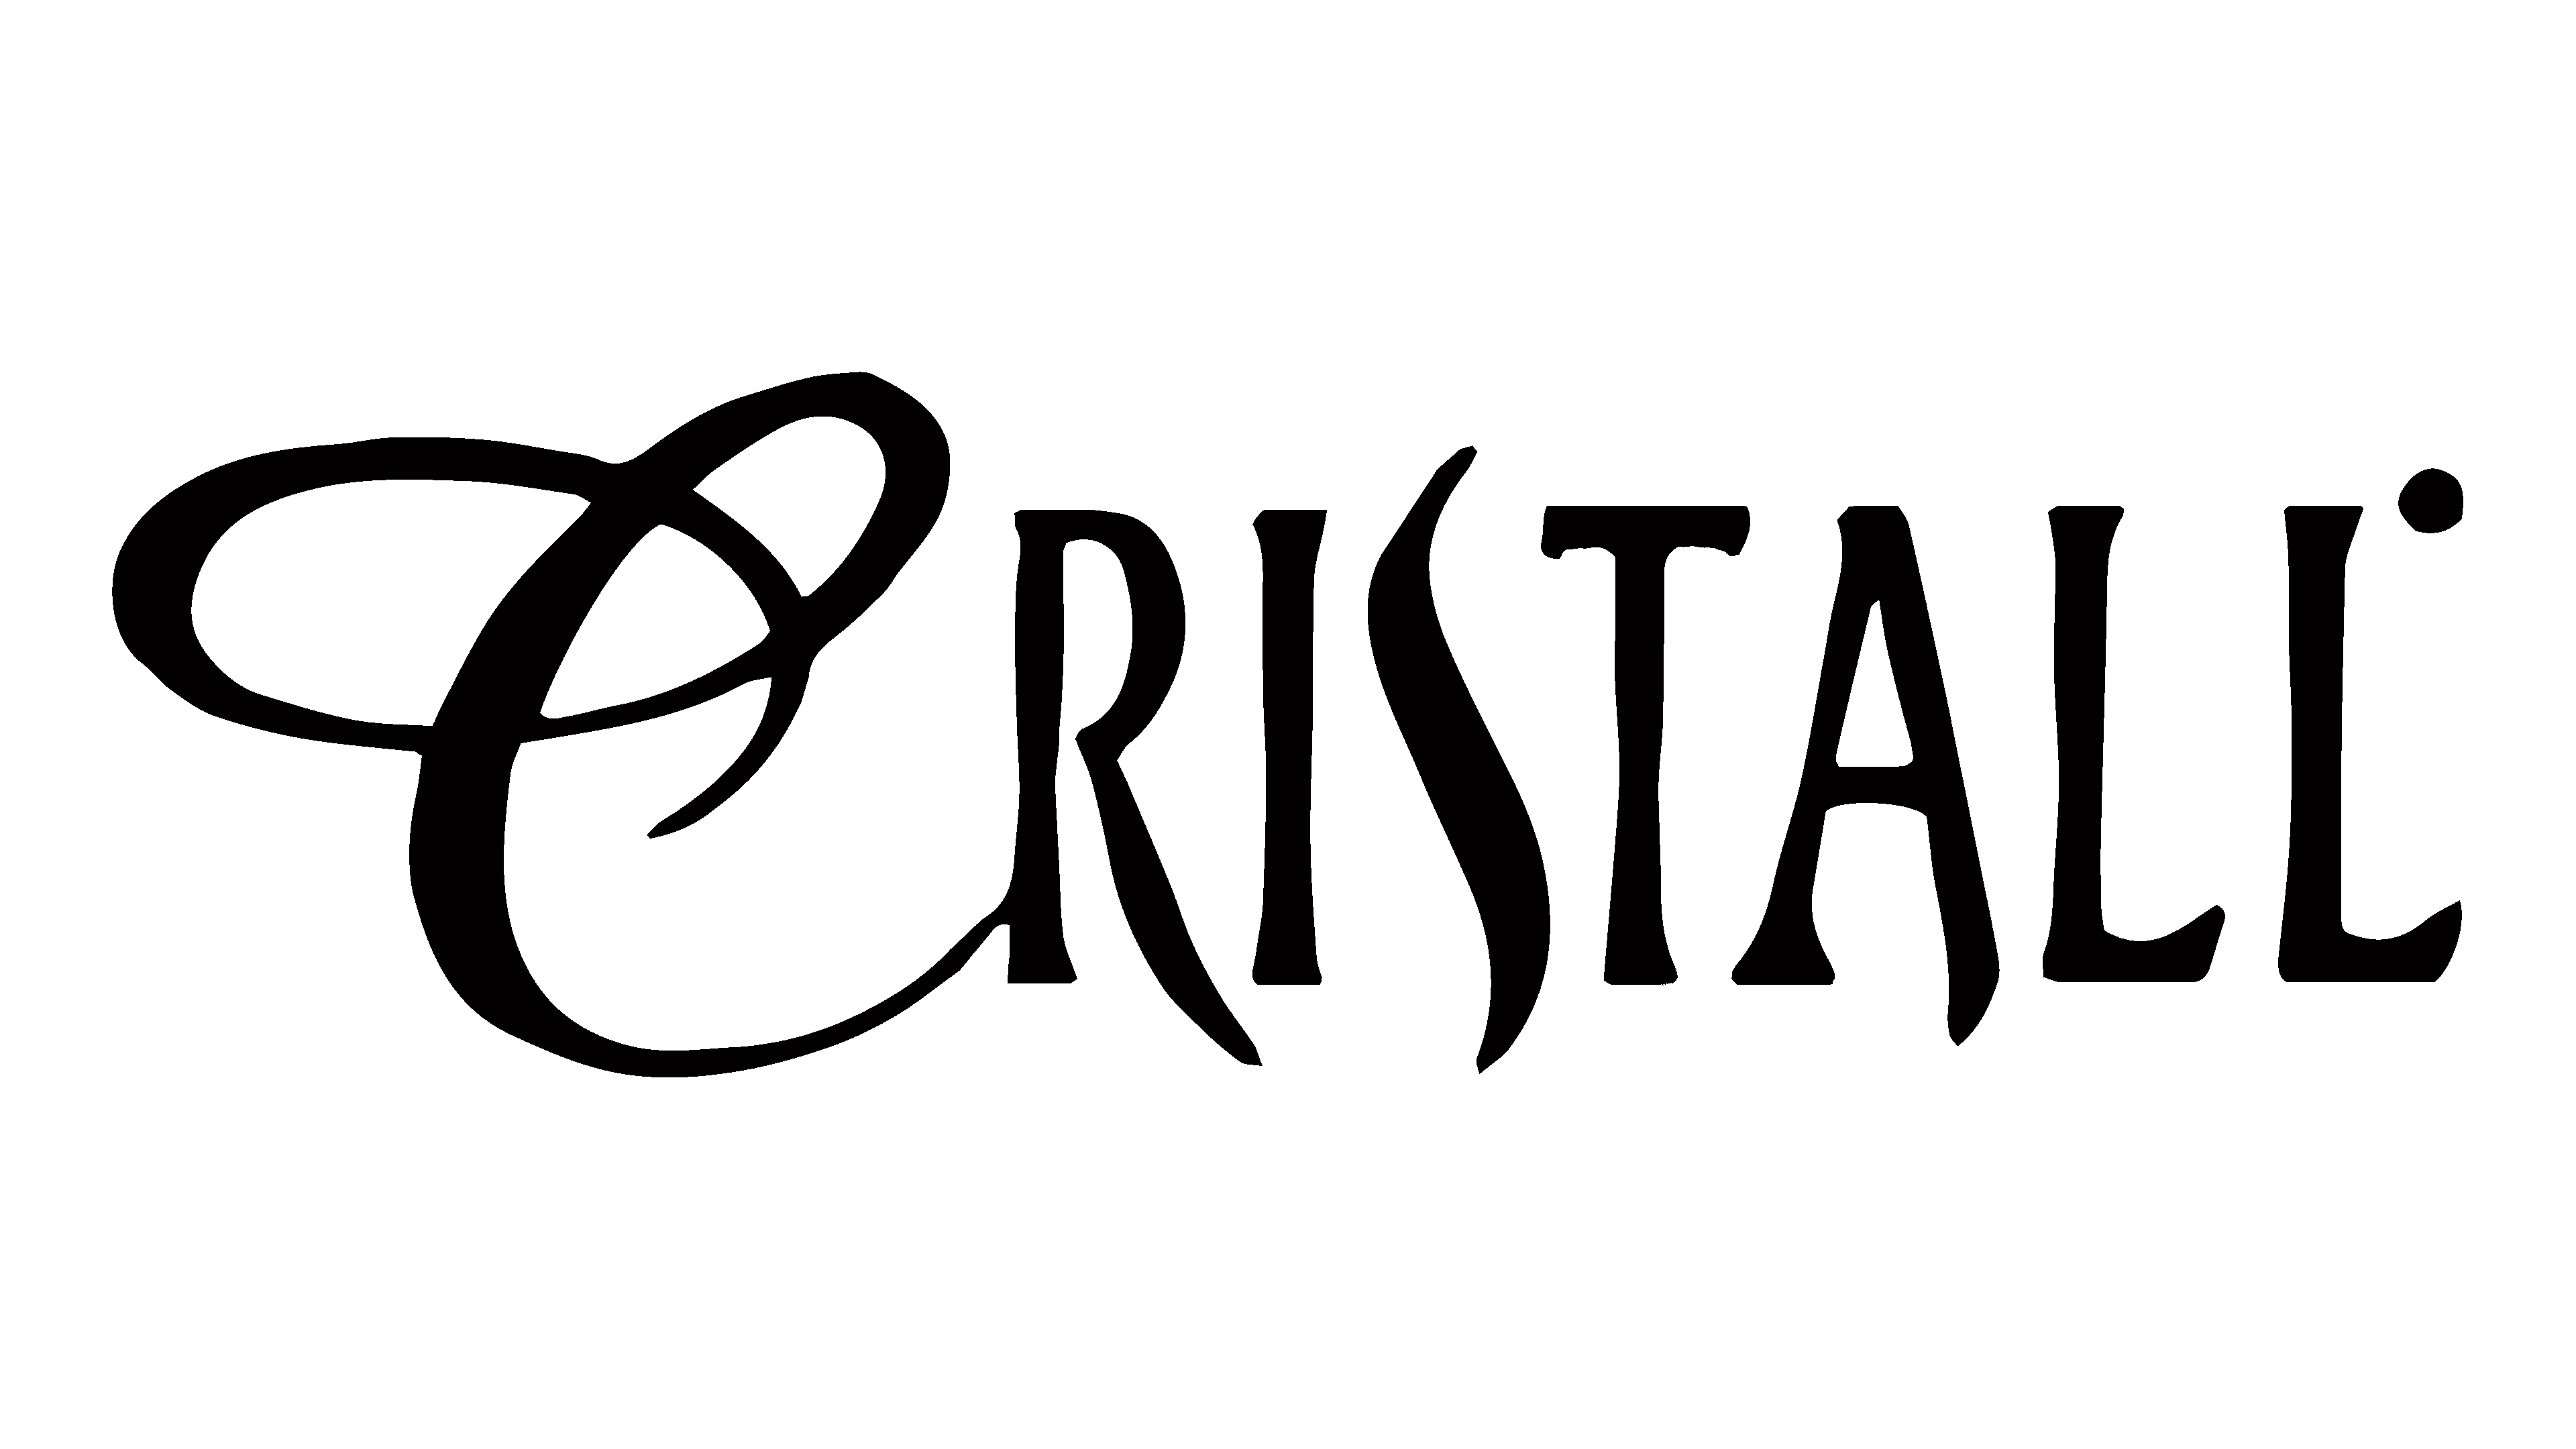 cristal - Wiktionary, the free dictionary